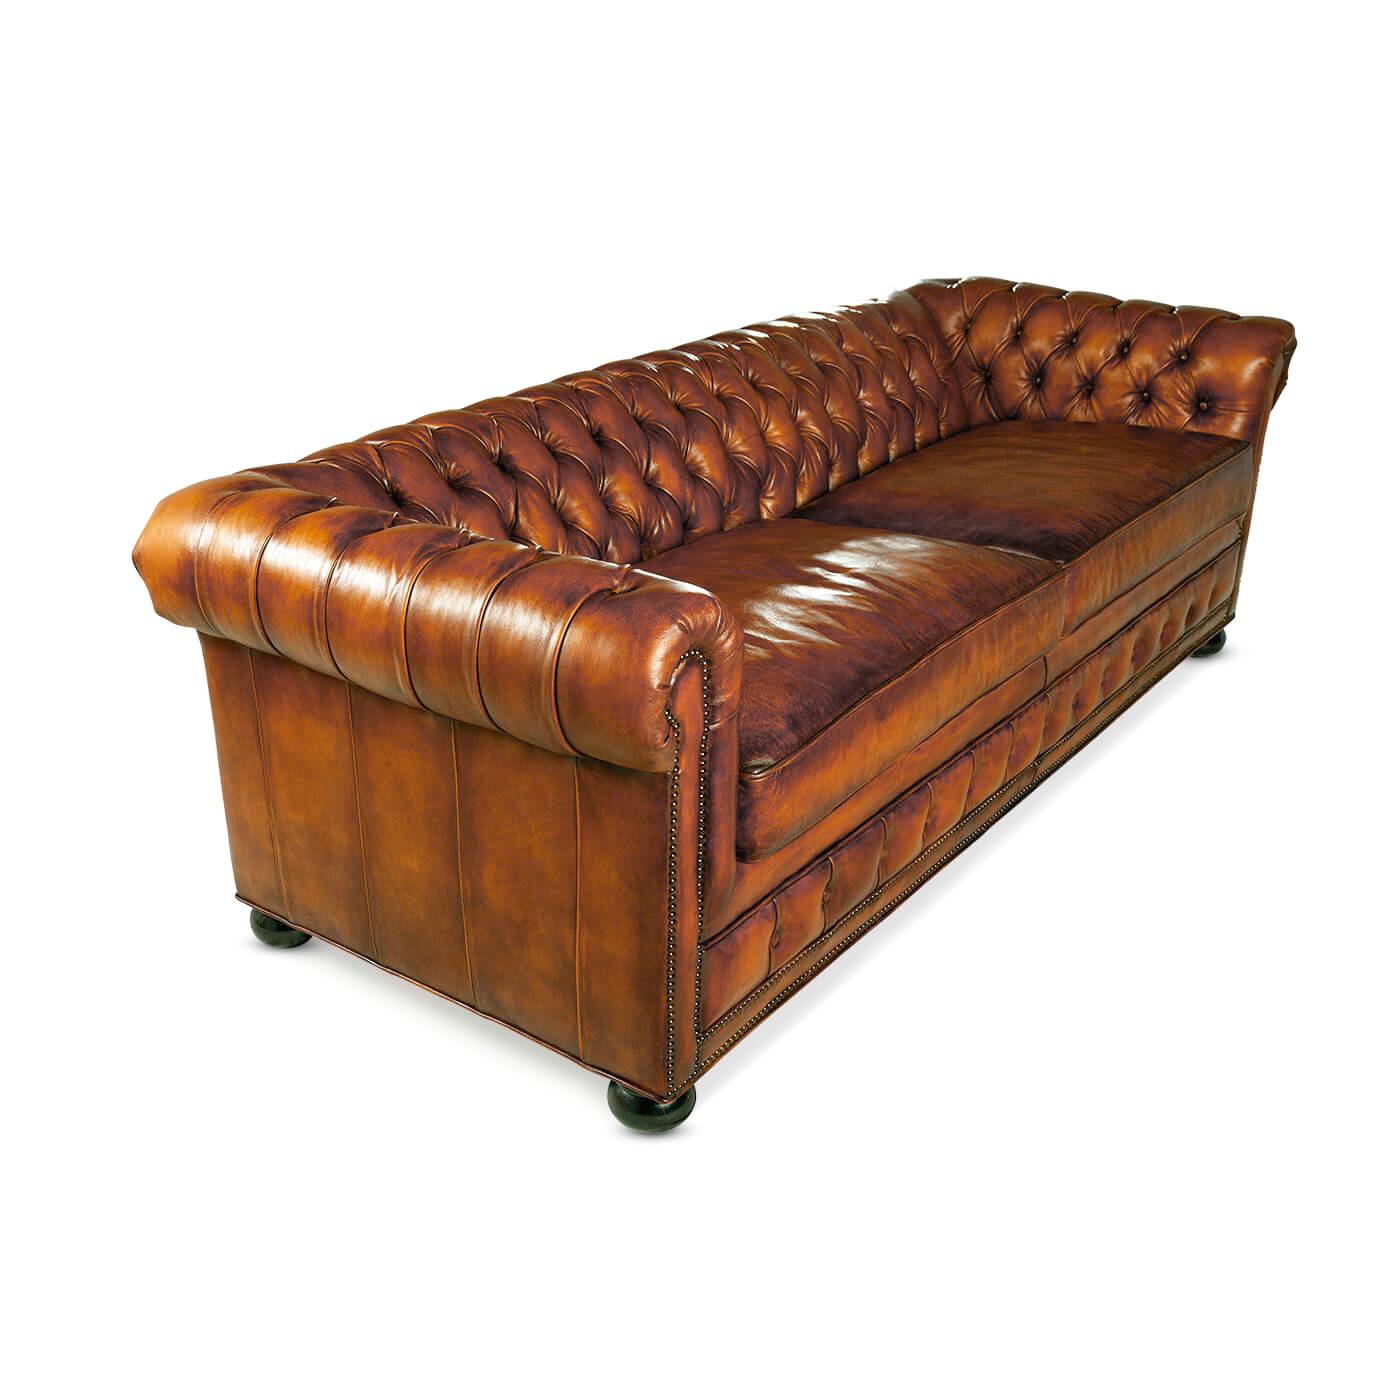 American Antiqued Chesterfield Leather Sofa For Sale